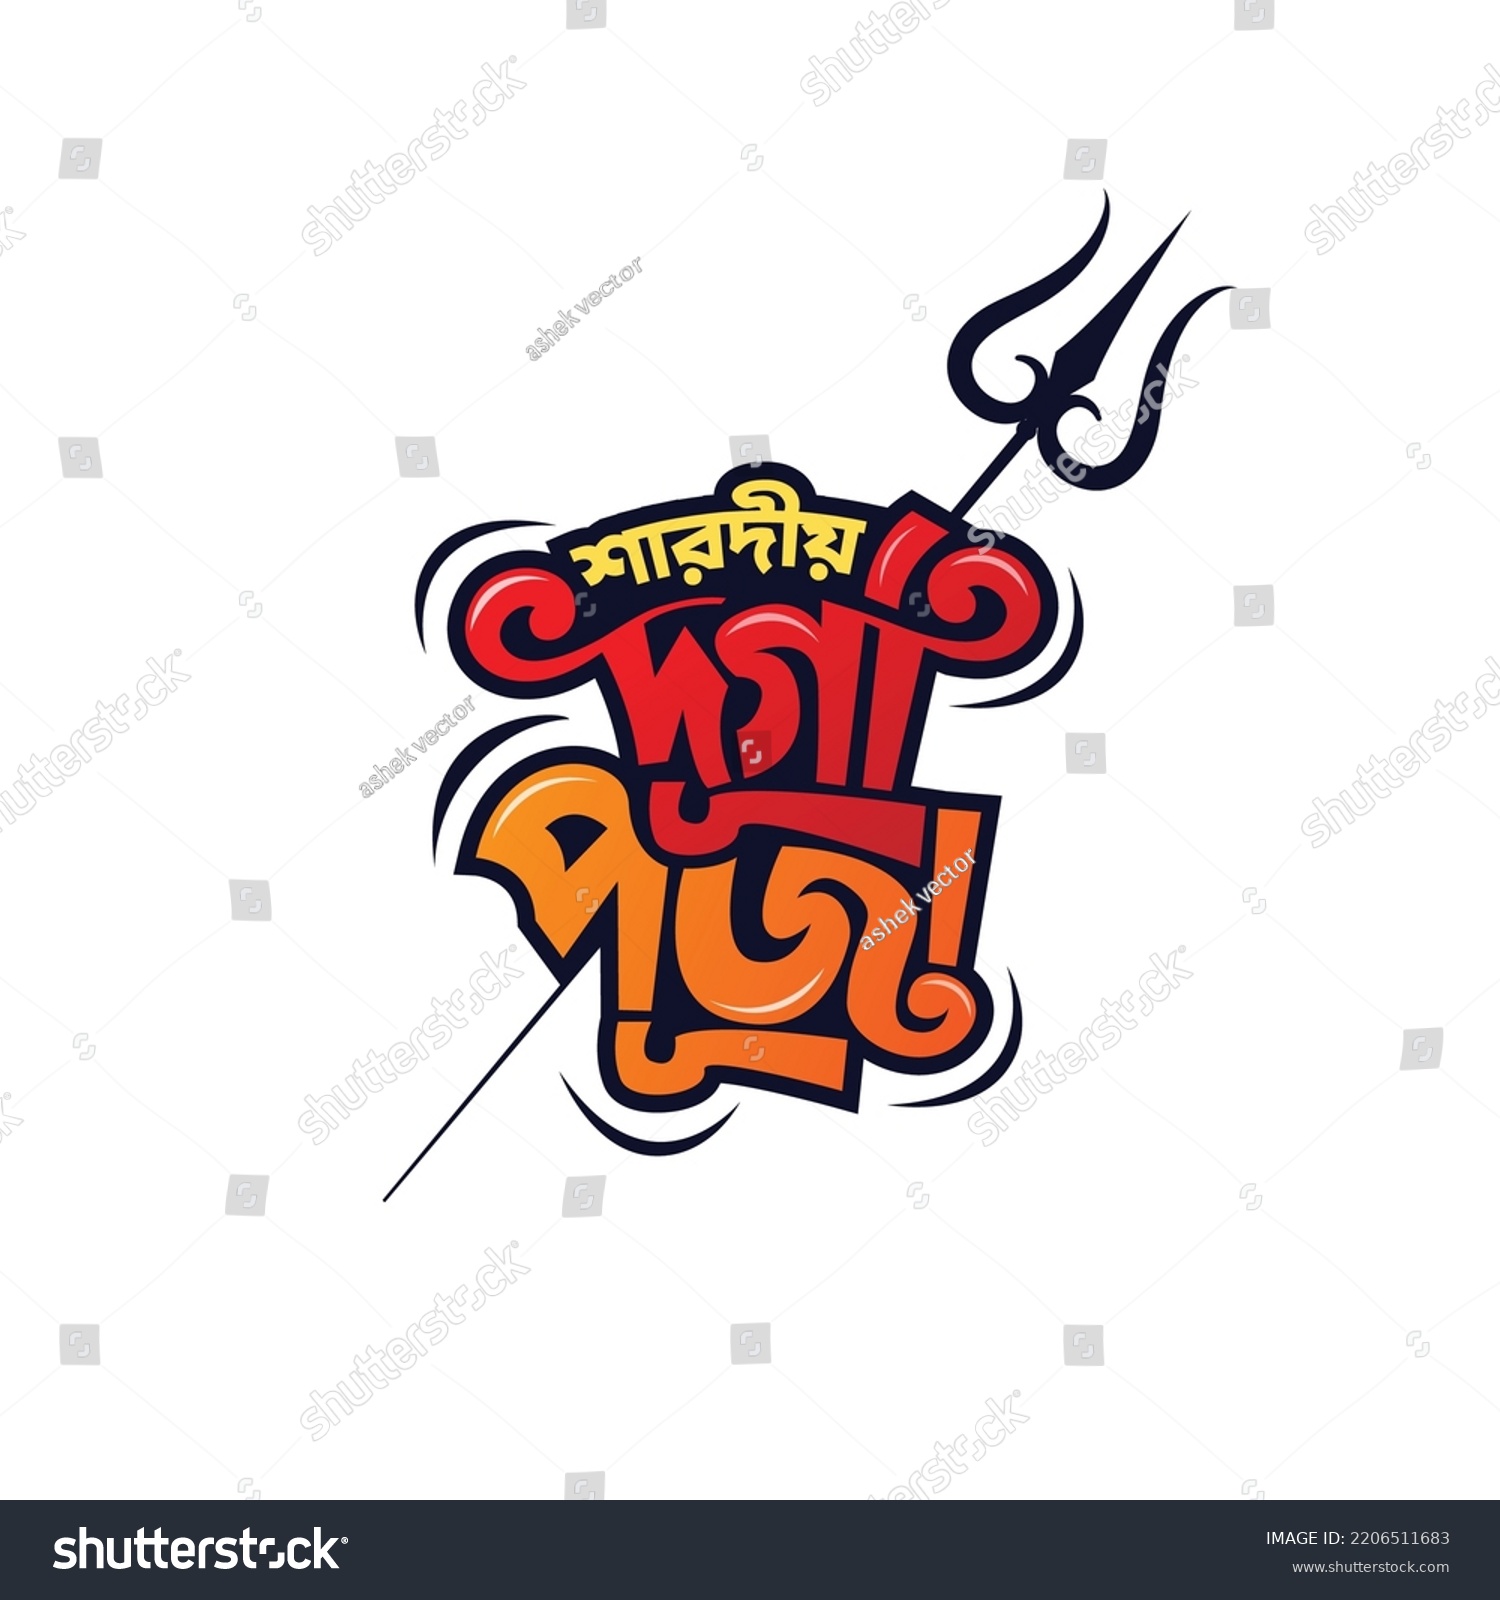 SVG of Durga Puja Vector Template Greeting Card Bangla Typography Design. Durga Puja lettering design On Blue Color Mandala Background To Celebrate Annual Hindu 
Festival Holiday.
 svg